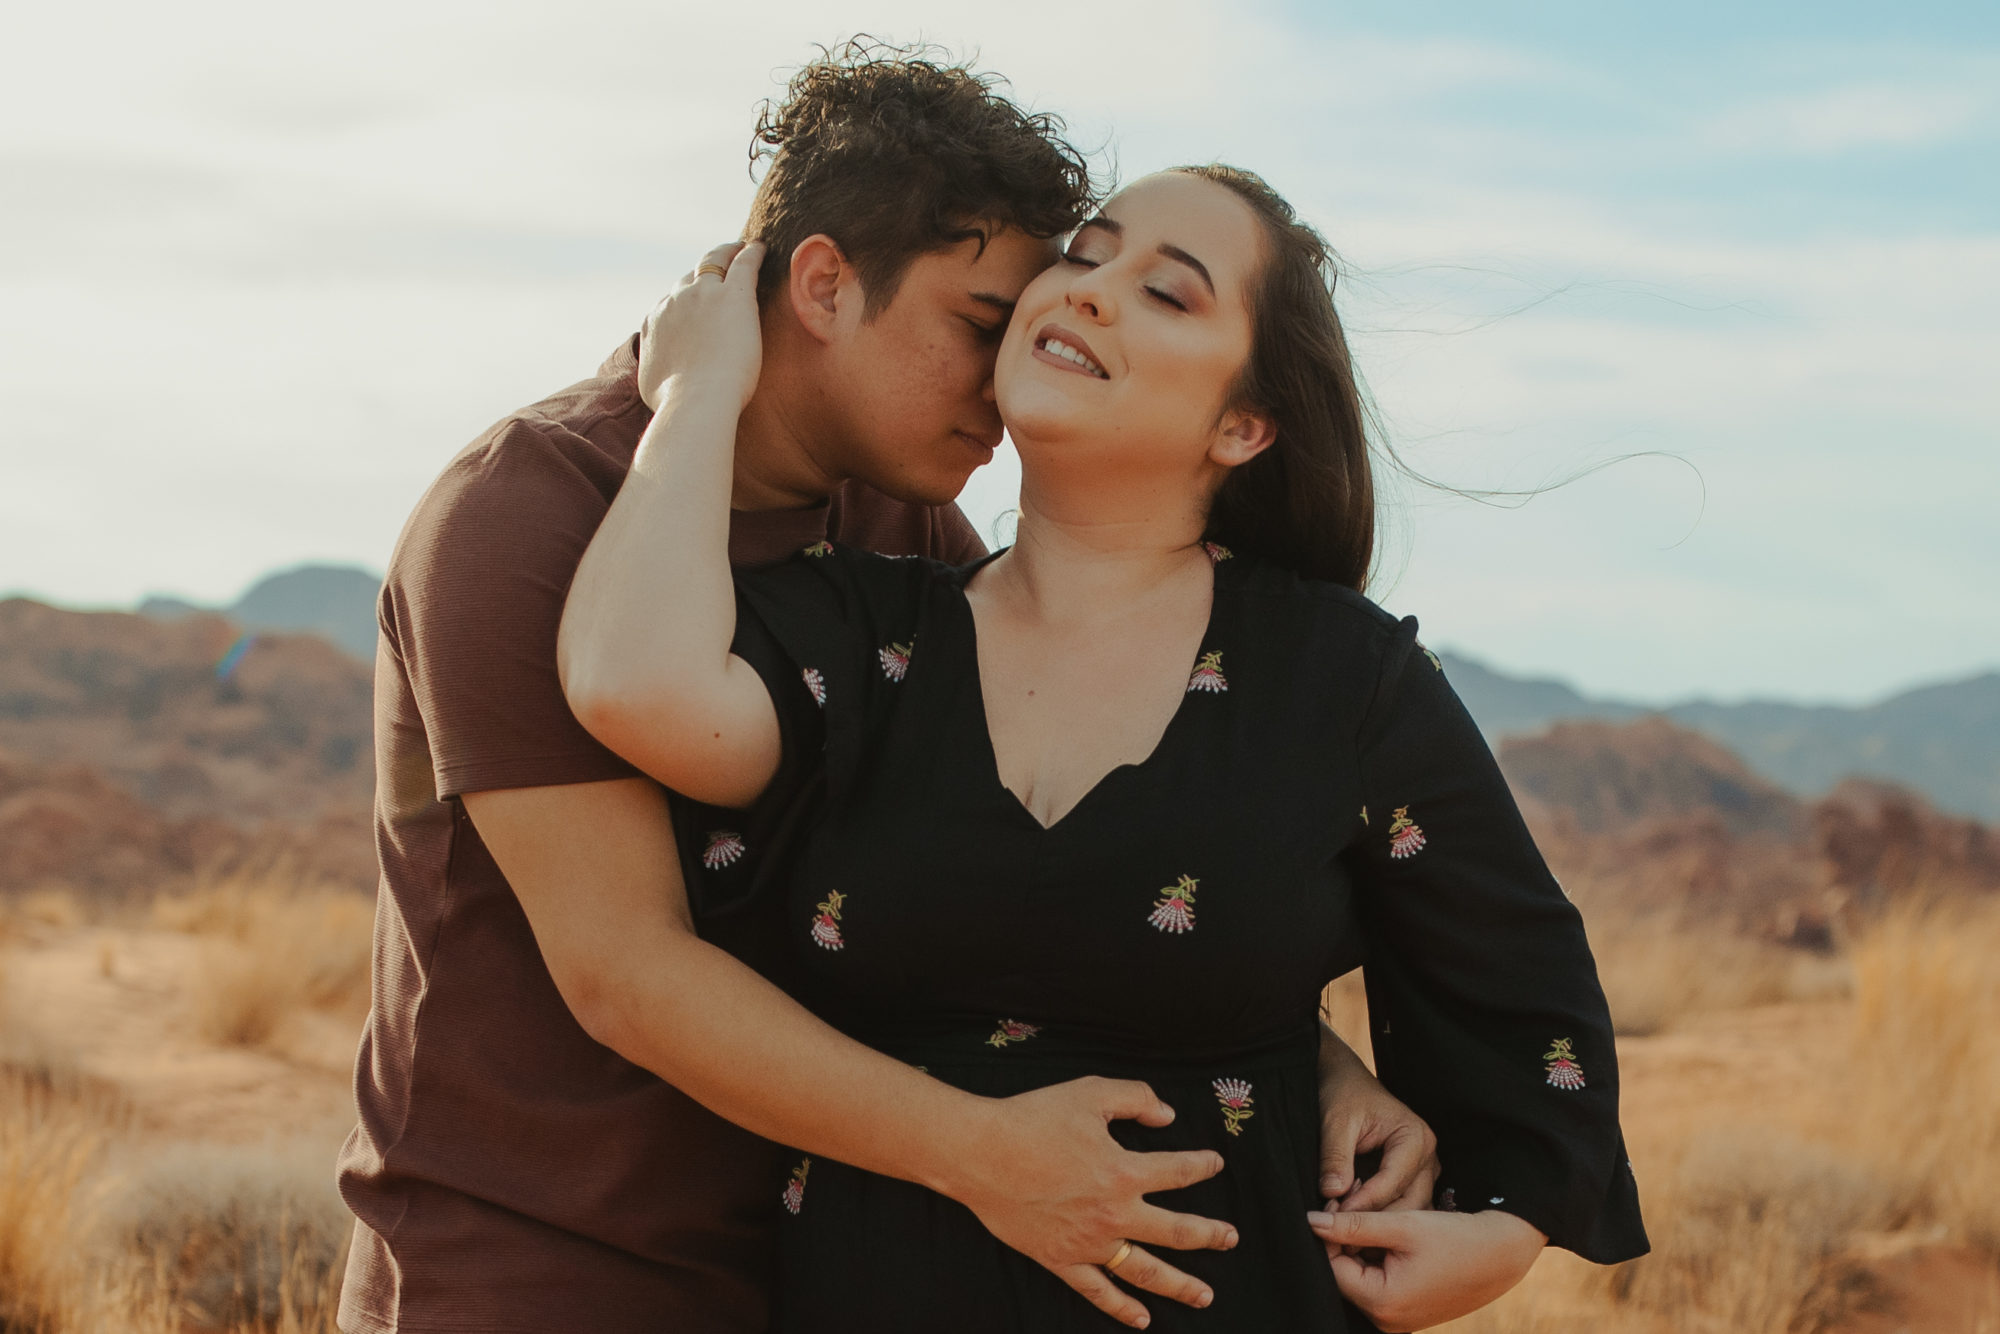 Couple sharing an intimate moment with their heads together in the desert